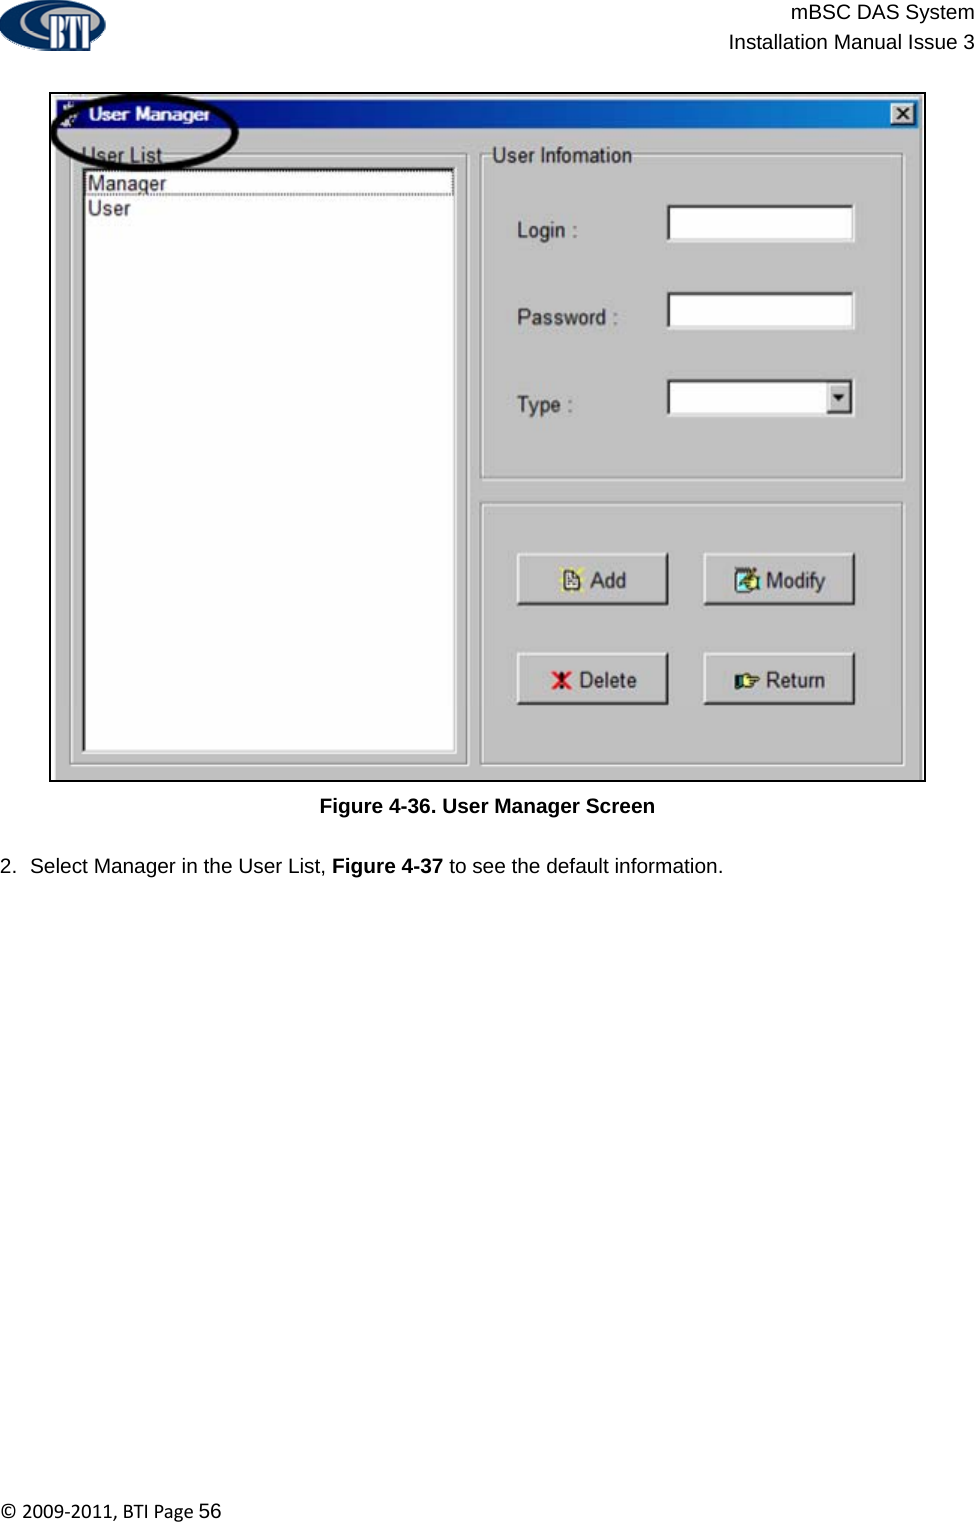                          mBSC DAS System  Installation Manual Issue 3  ©2009‐2011,BTIPage56  Figure 4-36. User Manager Screen  2.  Select Manager in the User List, Figure 4-37 to see the default information. 